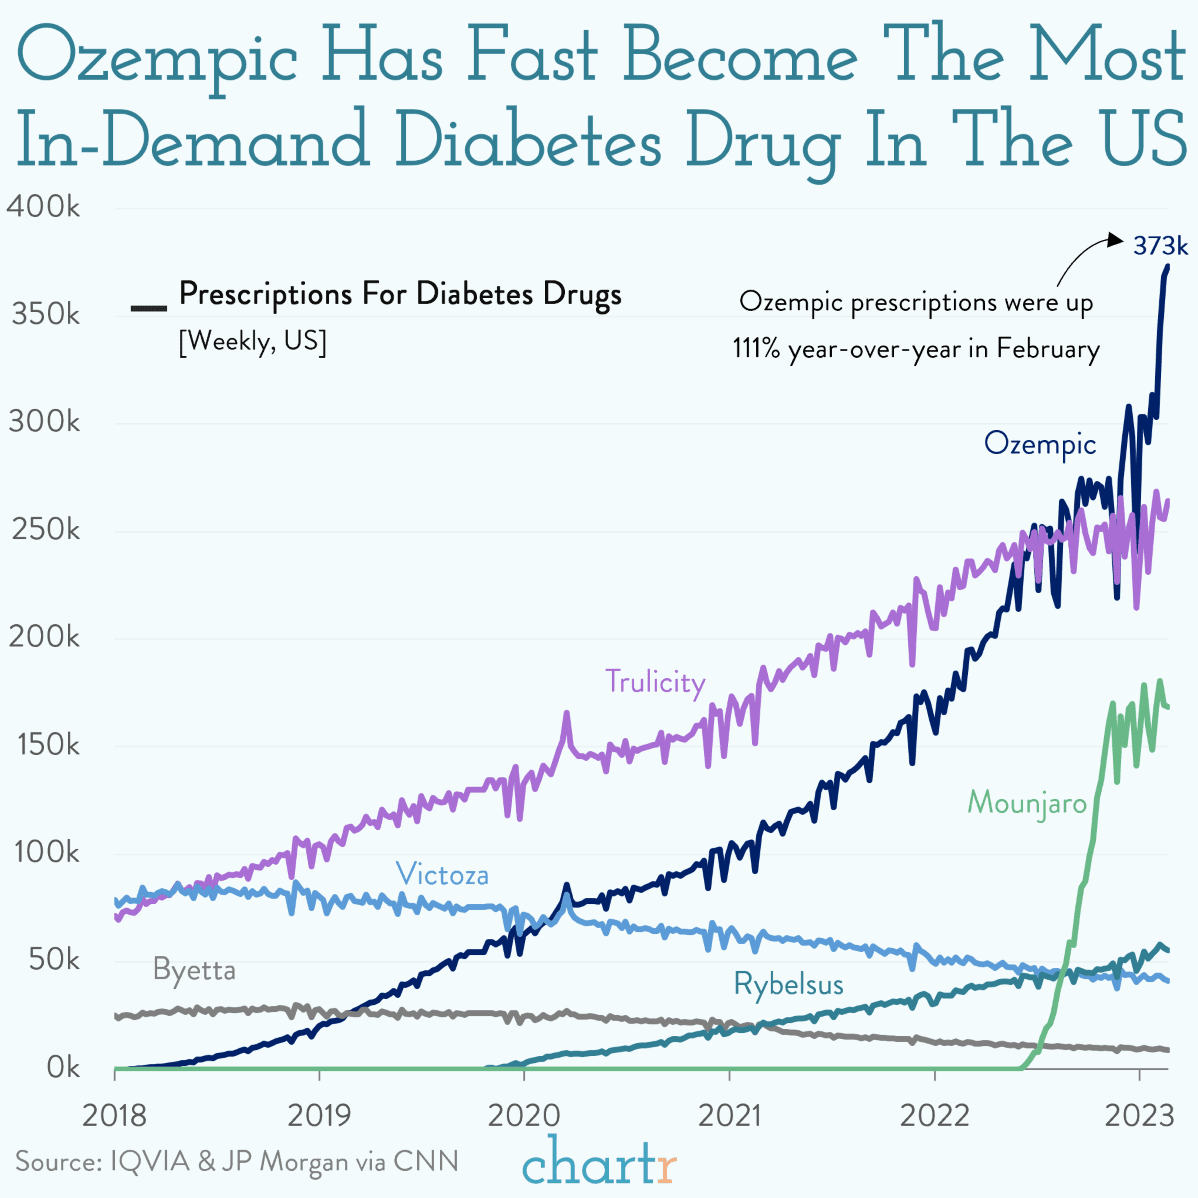 Scaling up: Ozempic's become the most in-demand diabetes drug in the US